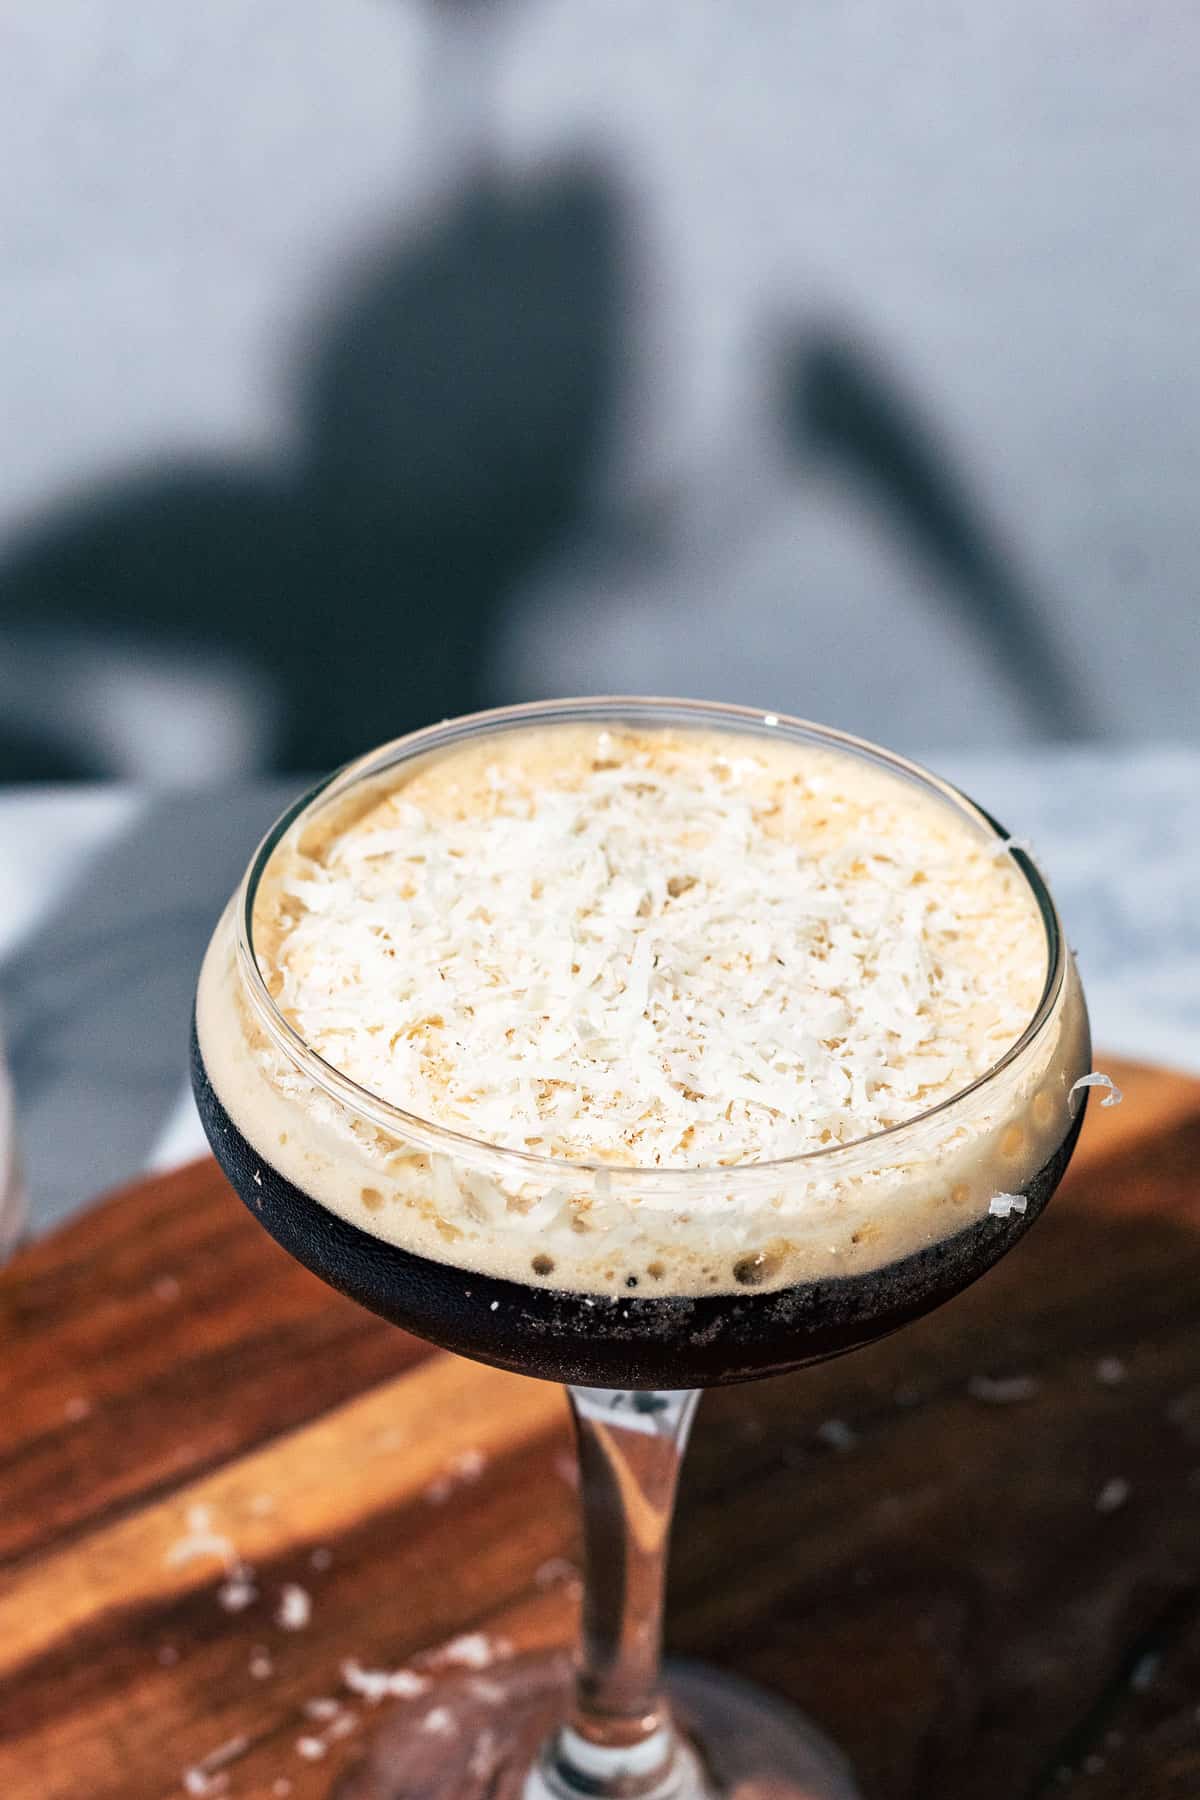 Espresso martini topped with shredded parmesan cheese on a wood surface.